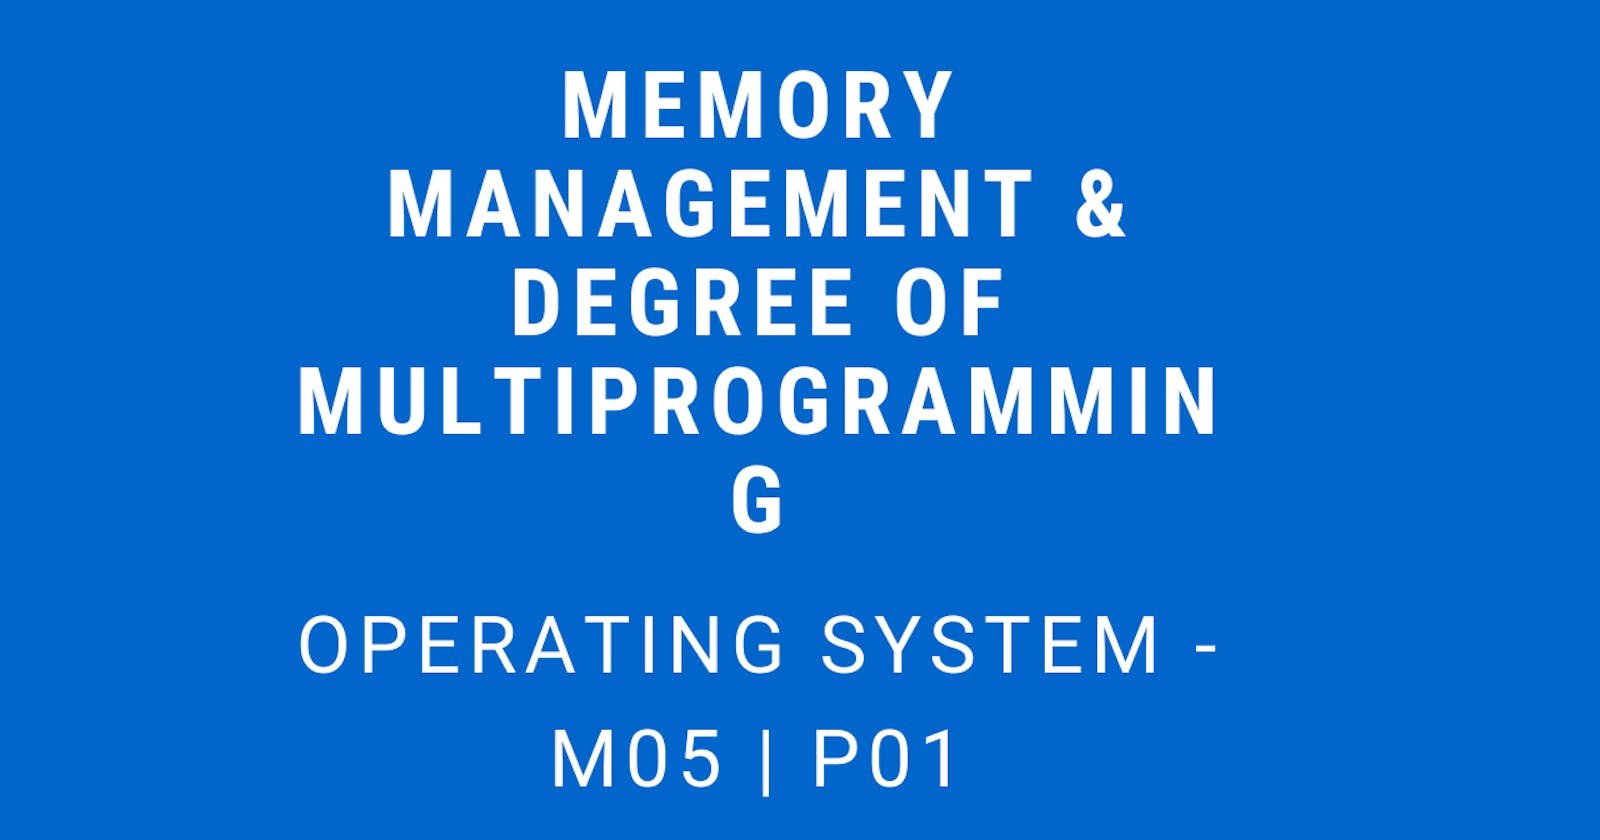 Memory Management and Degree of Multiprogramming | Operating System - M05 P01